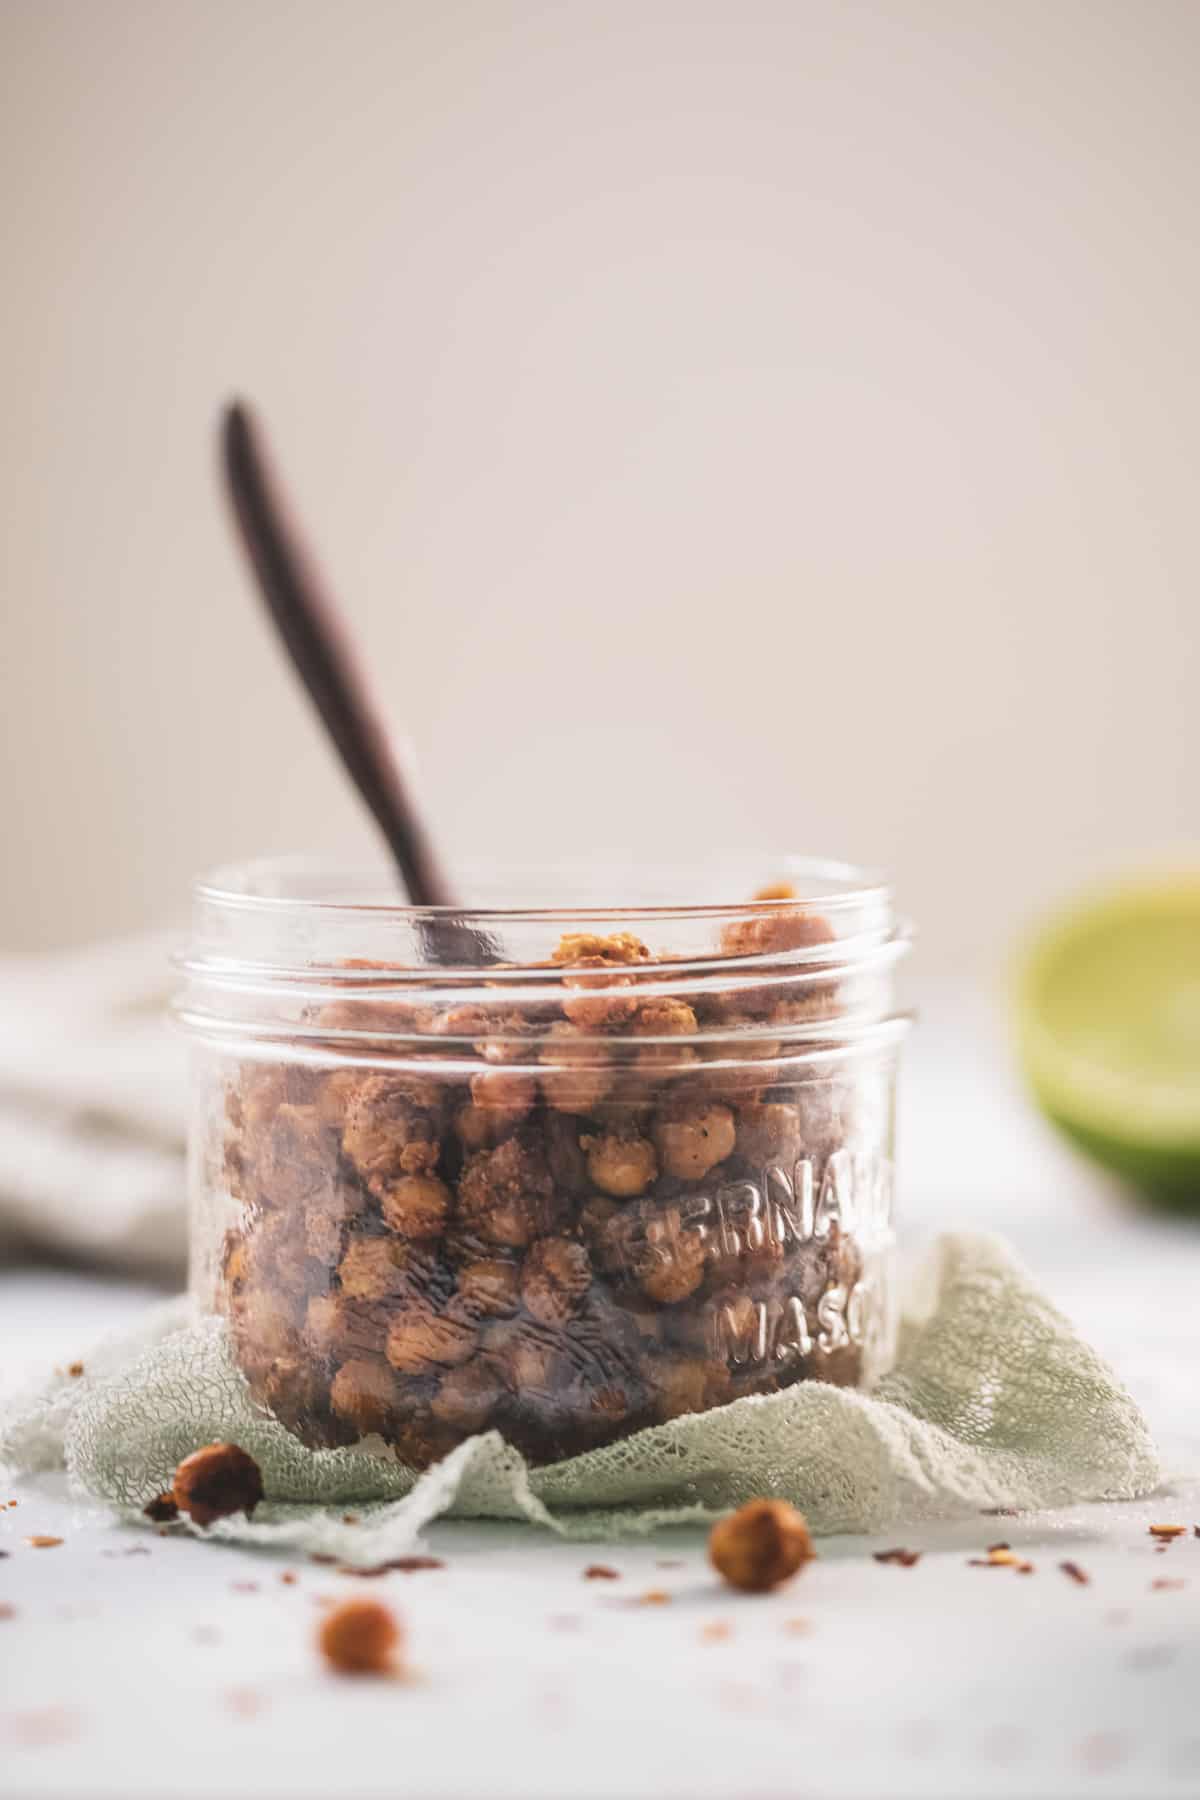 A jar of roasted chickpeas served on a sage green cloth with a wooden serving spoon, fresh lime and spilt chickpeas surrounding.